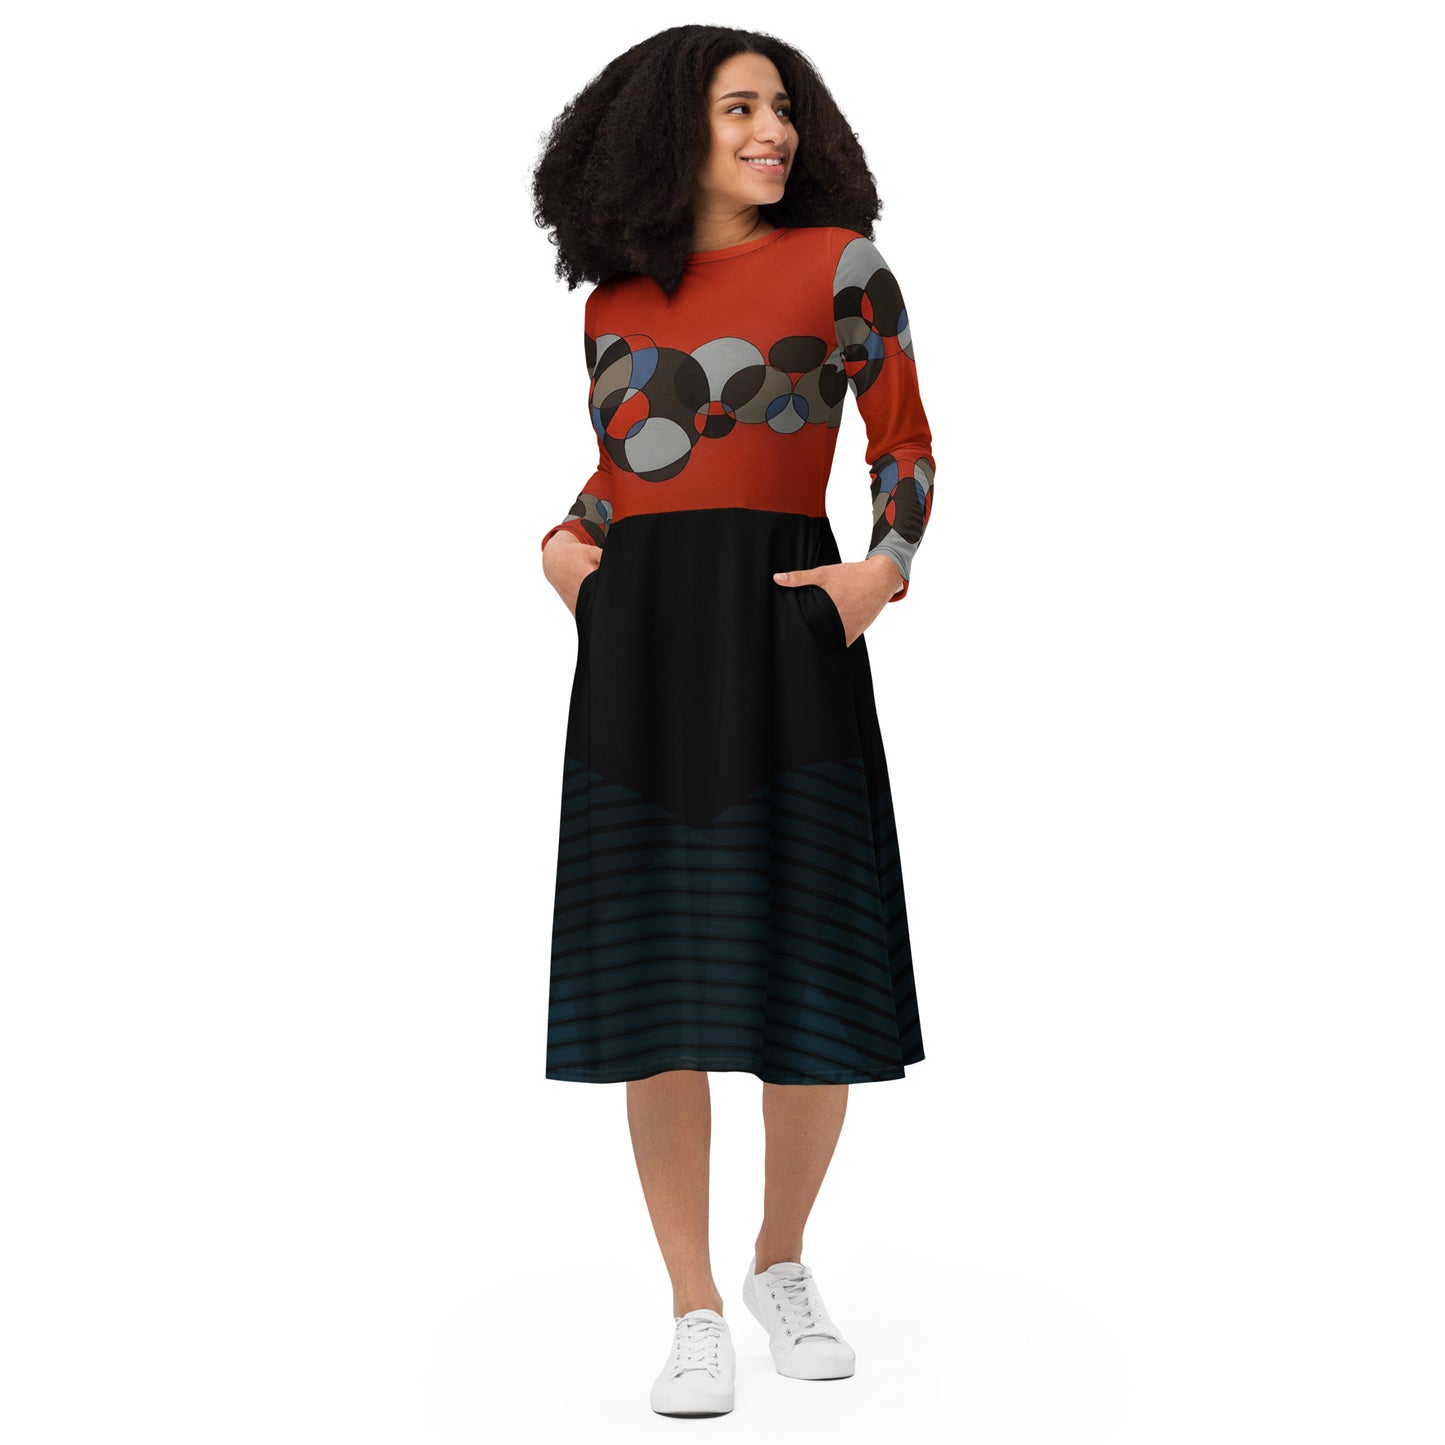 The Circle Only Has One Side All-over print long sleeve midi dress